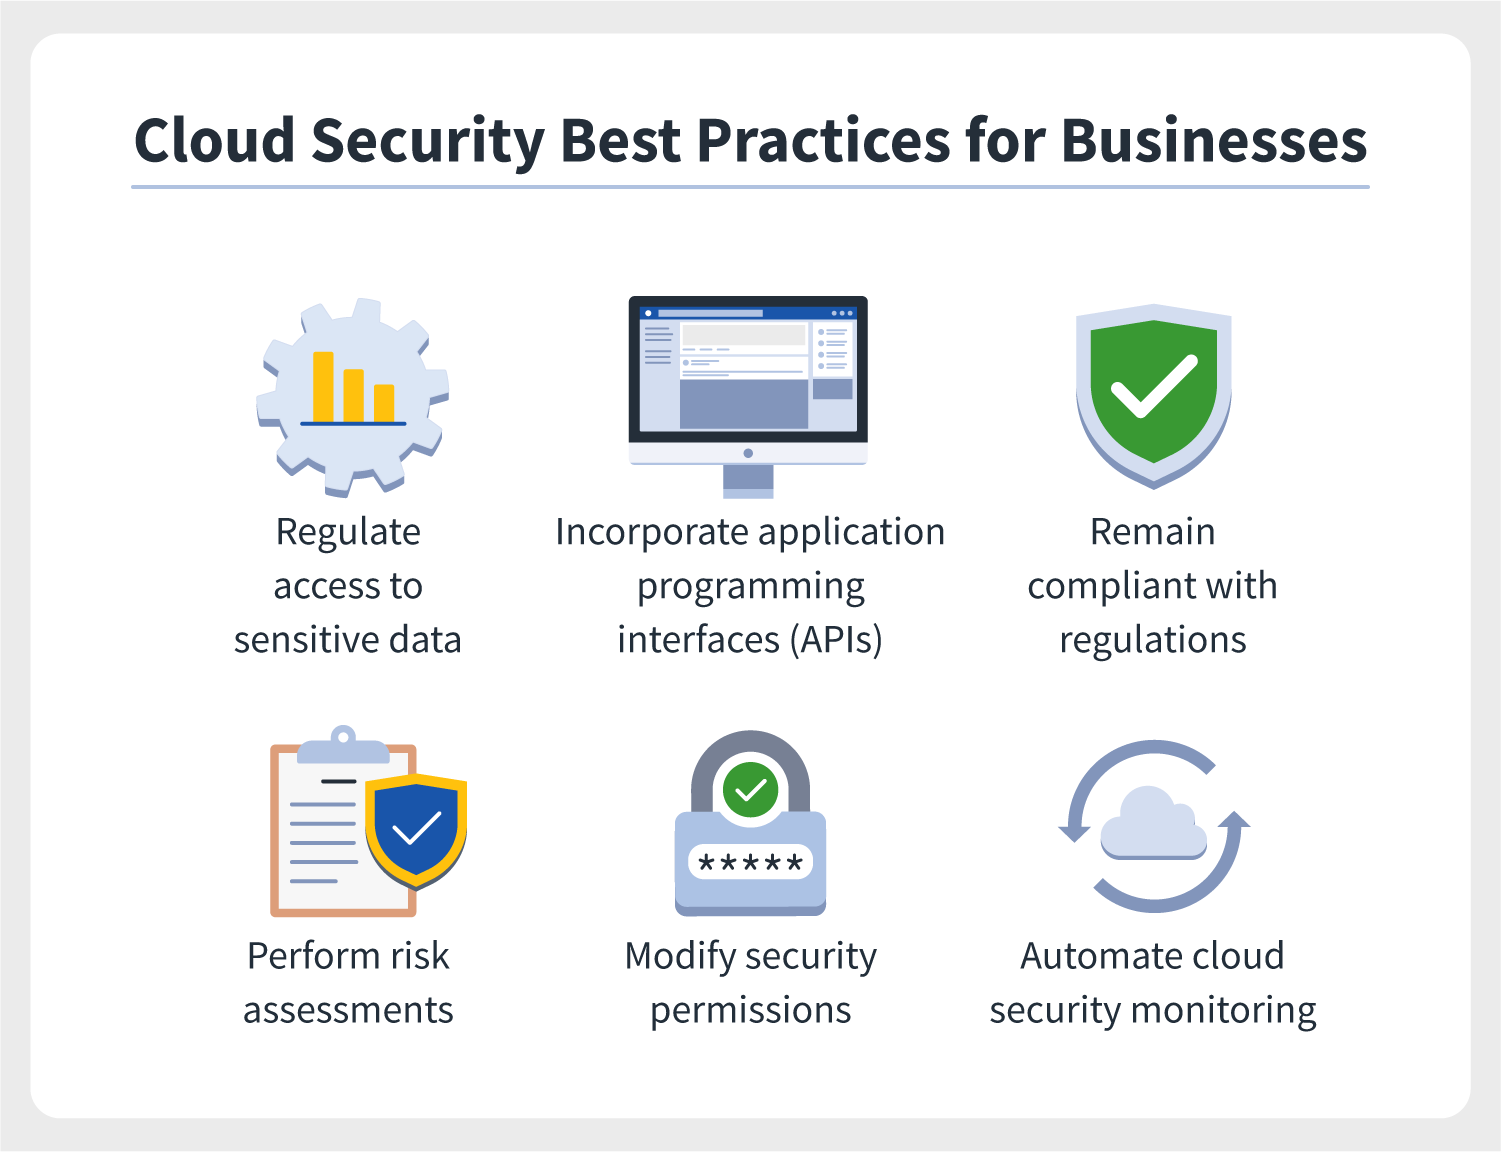 Six illustrations accompany cloud security best practices for businesses that can help with their defense against today’s cloud security threats.